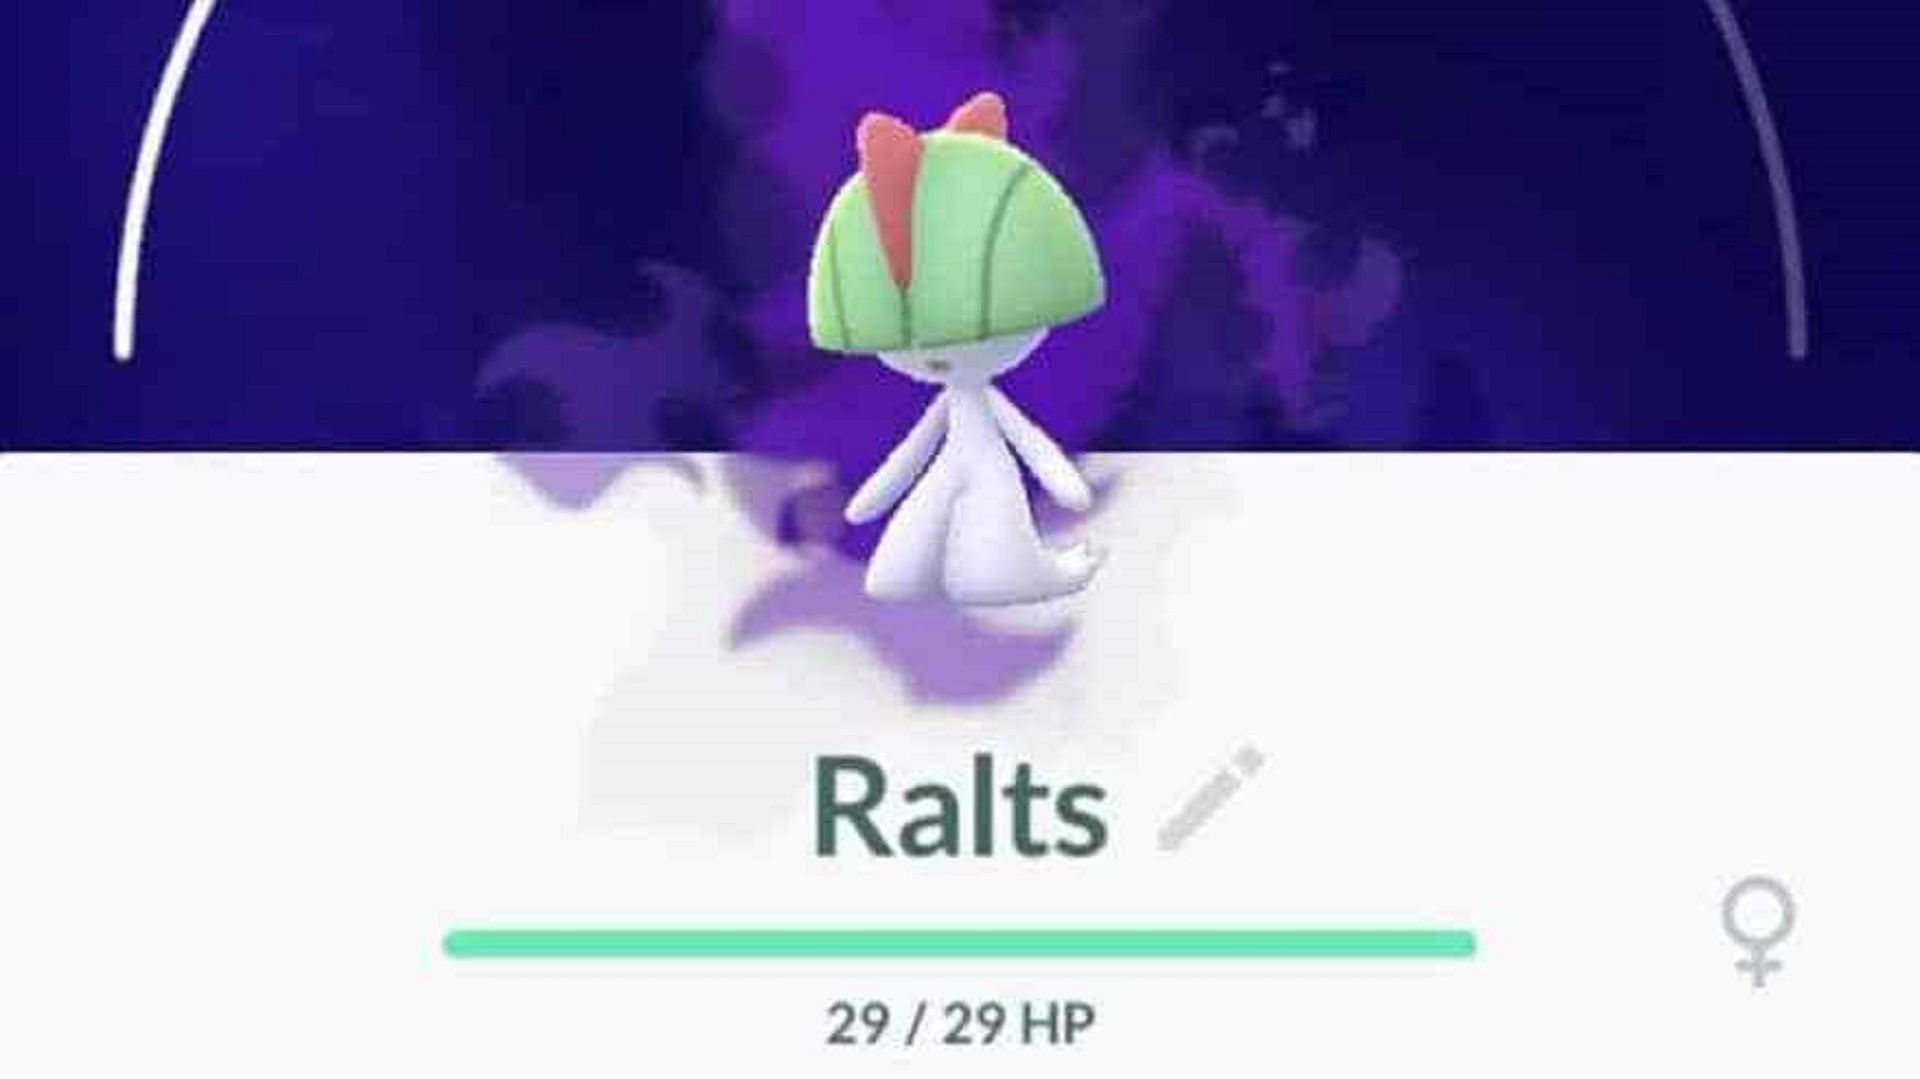 Shadow Ralts on the Pokemon screen in-game (Image via Niantic)